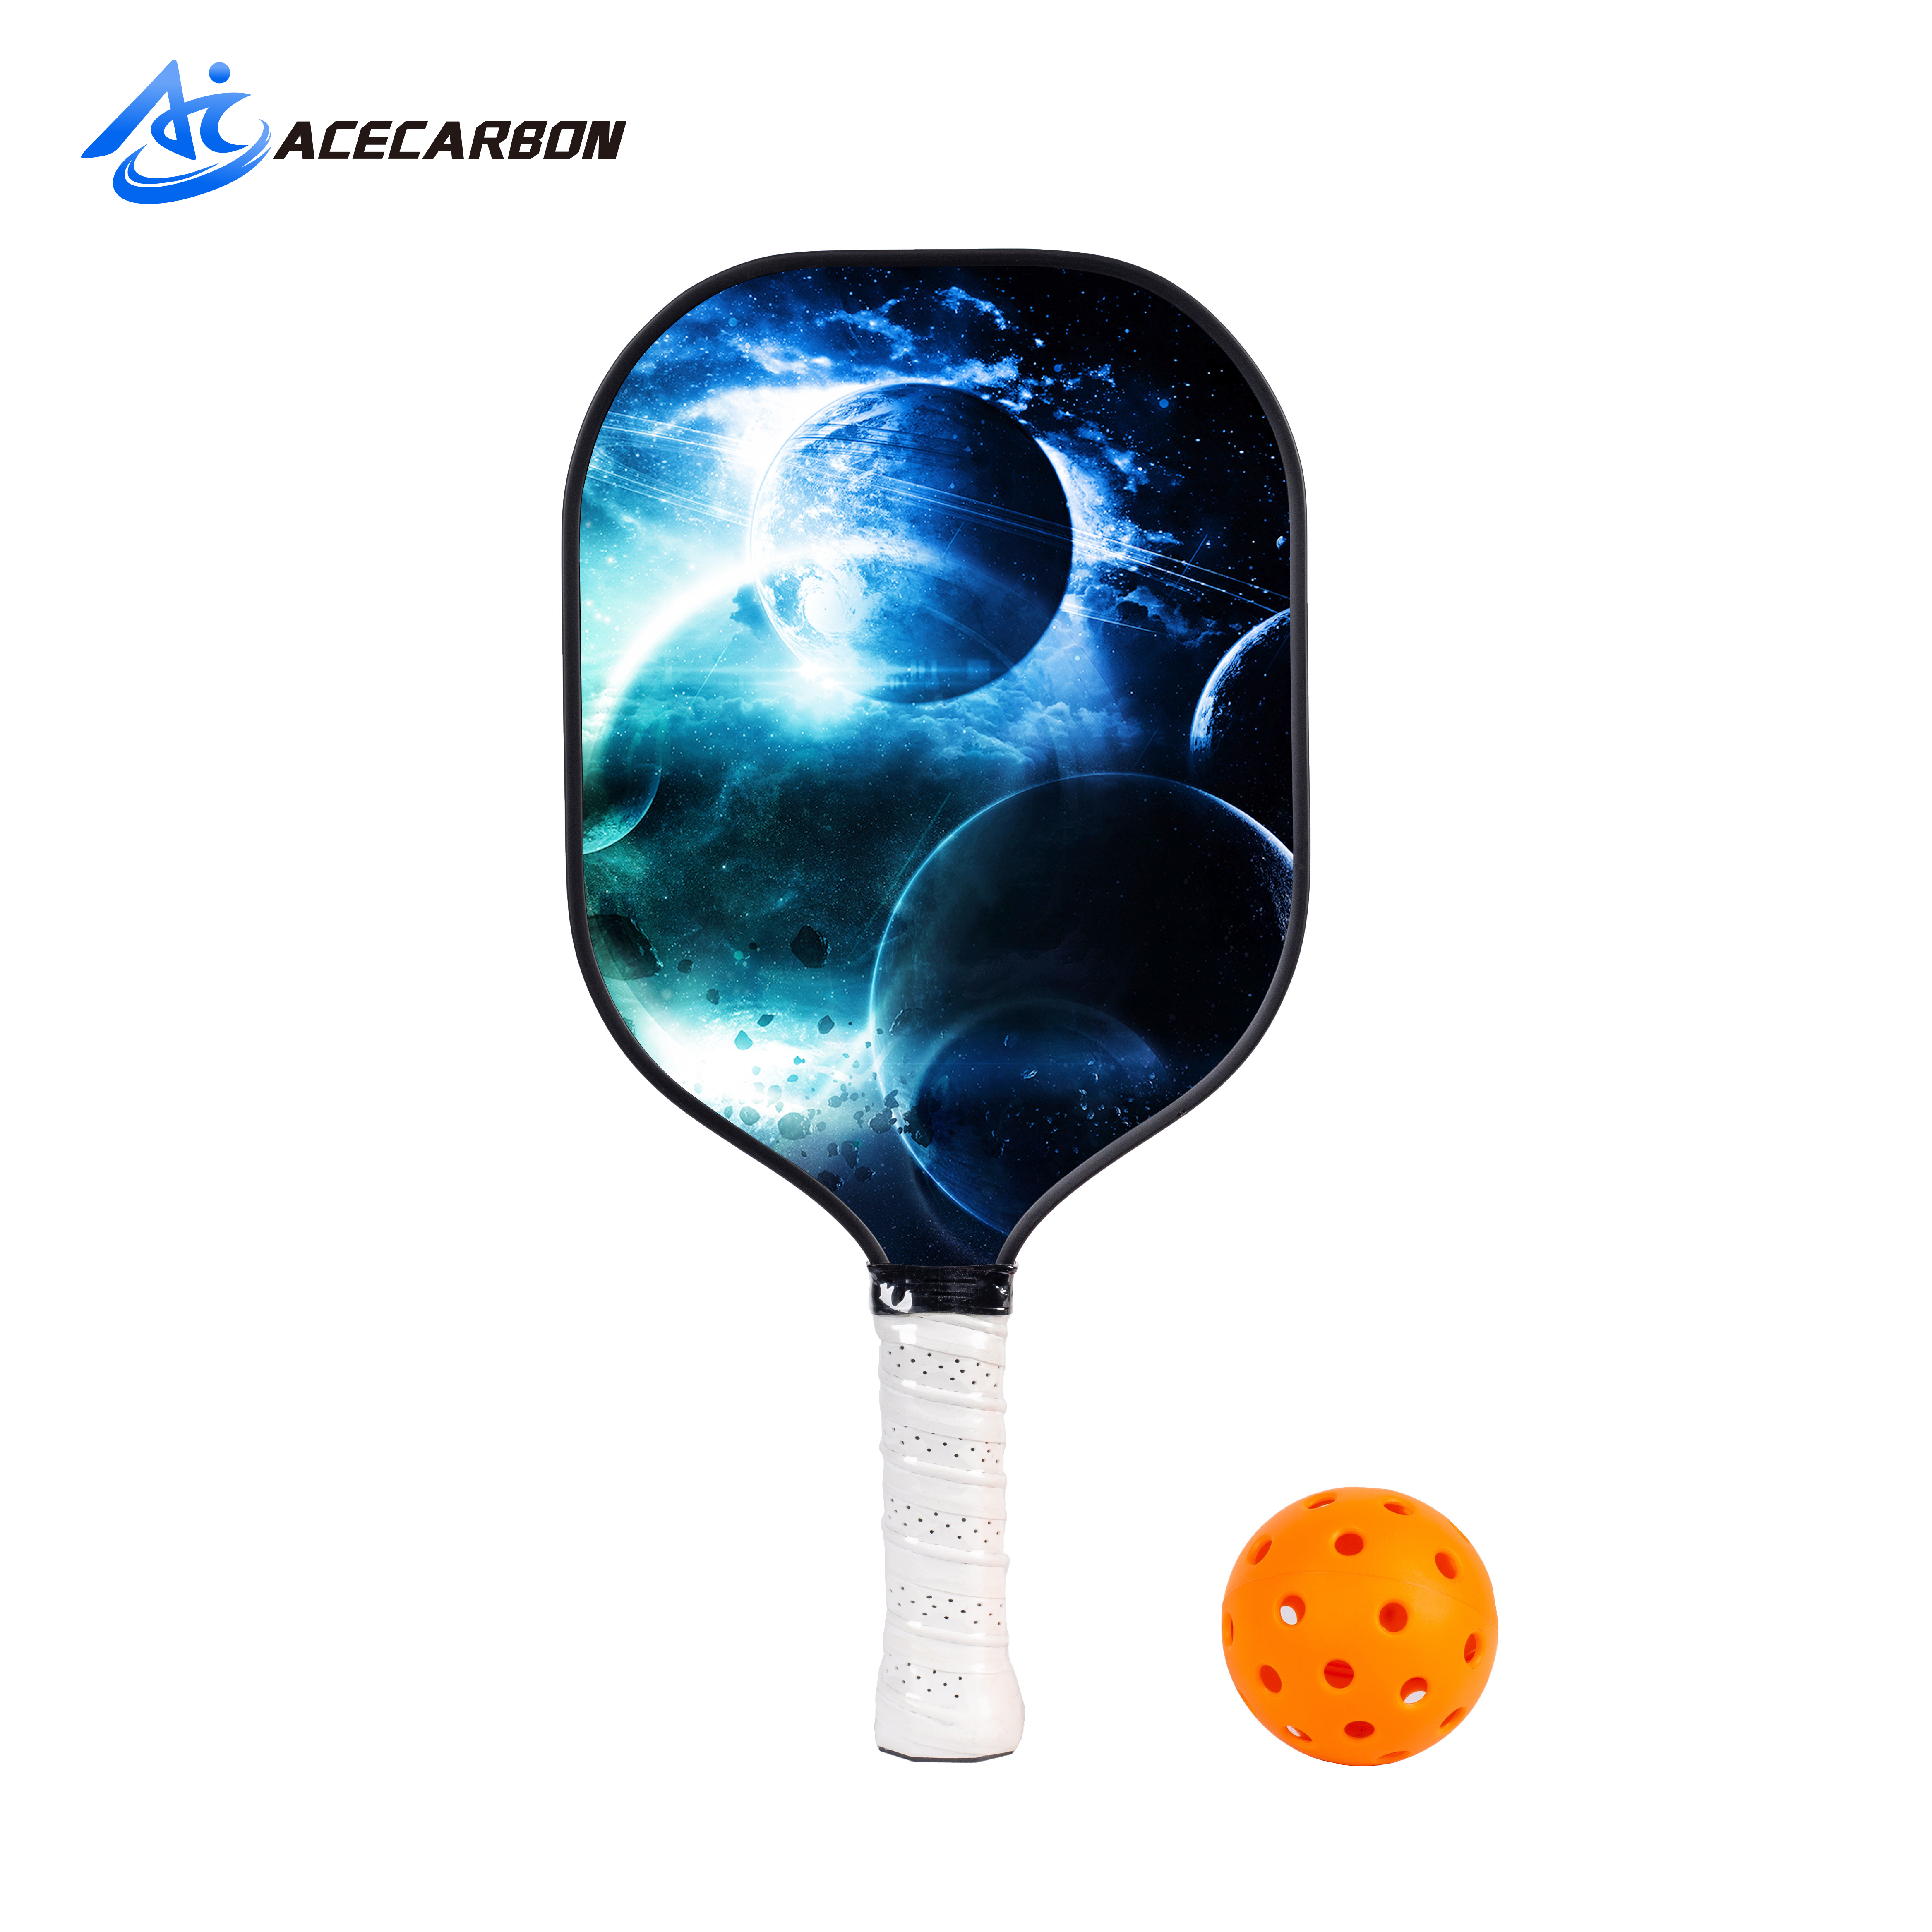 The perfect Badminton Racket – The Complete Guide